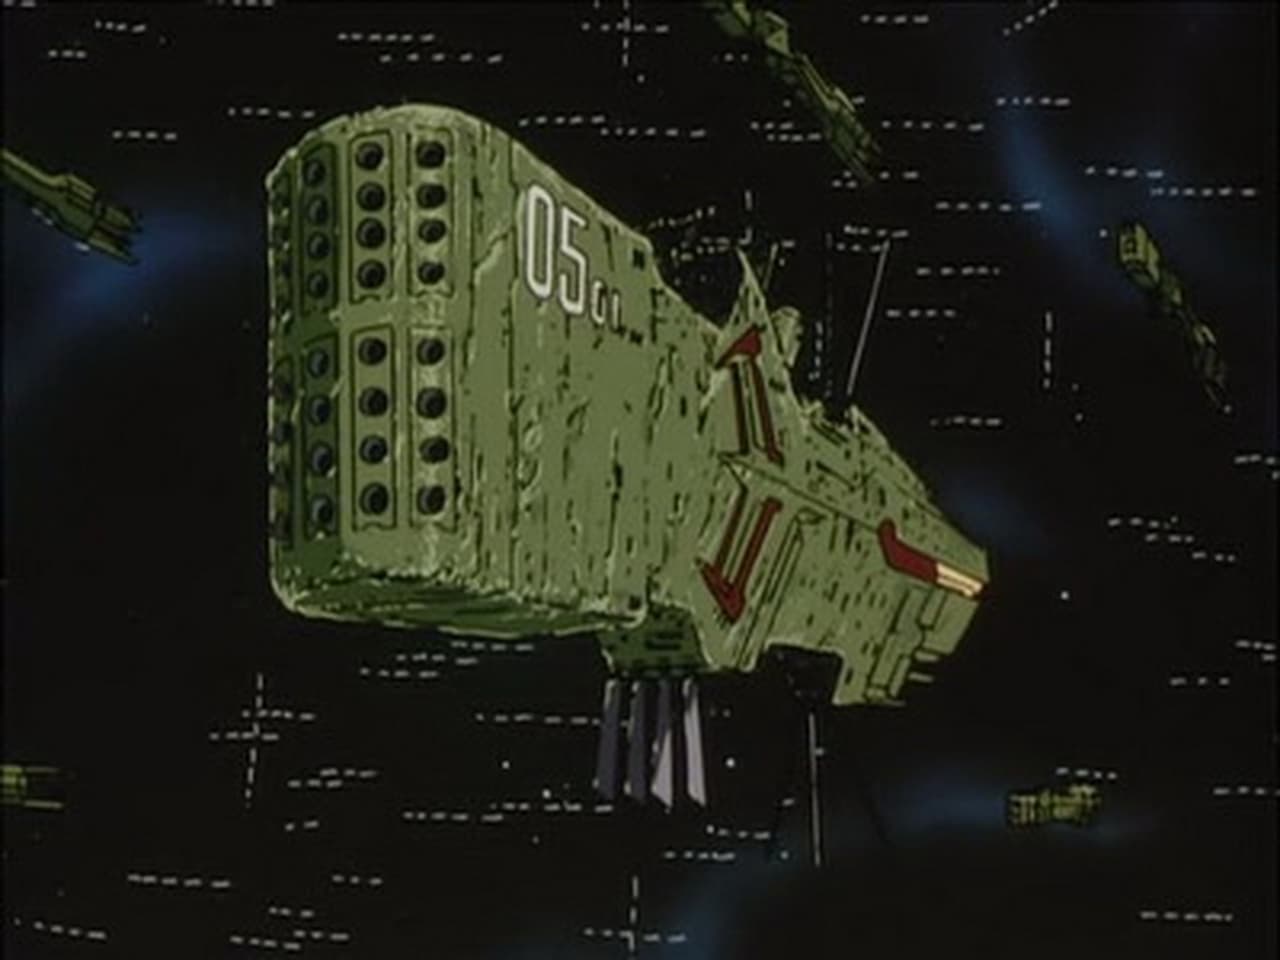 Legend of the Galactic Heroes - Season 3 Episode 18 : Battle at Starzone Mal-Adetta (Part 2)